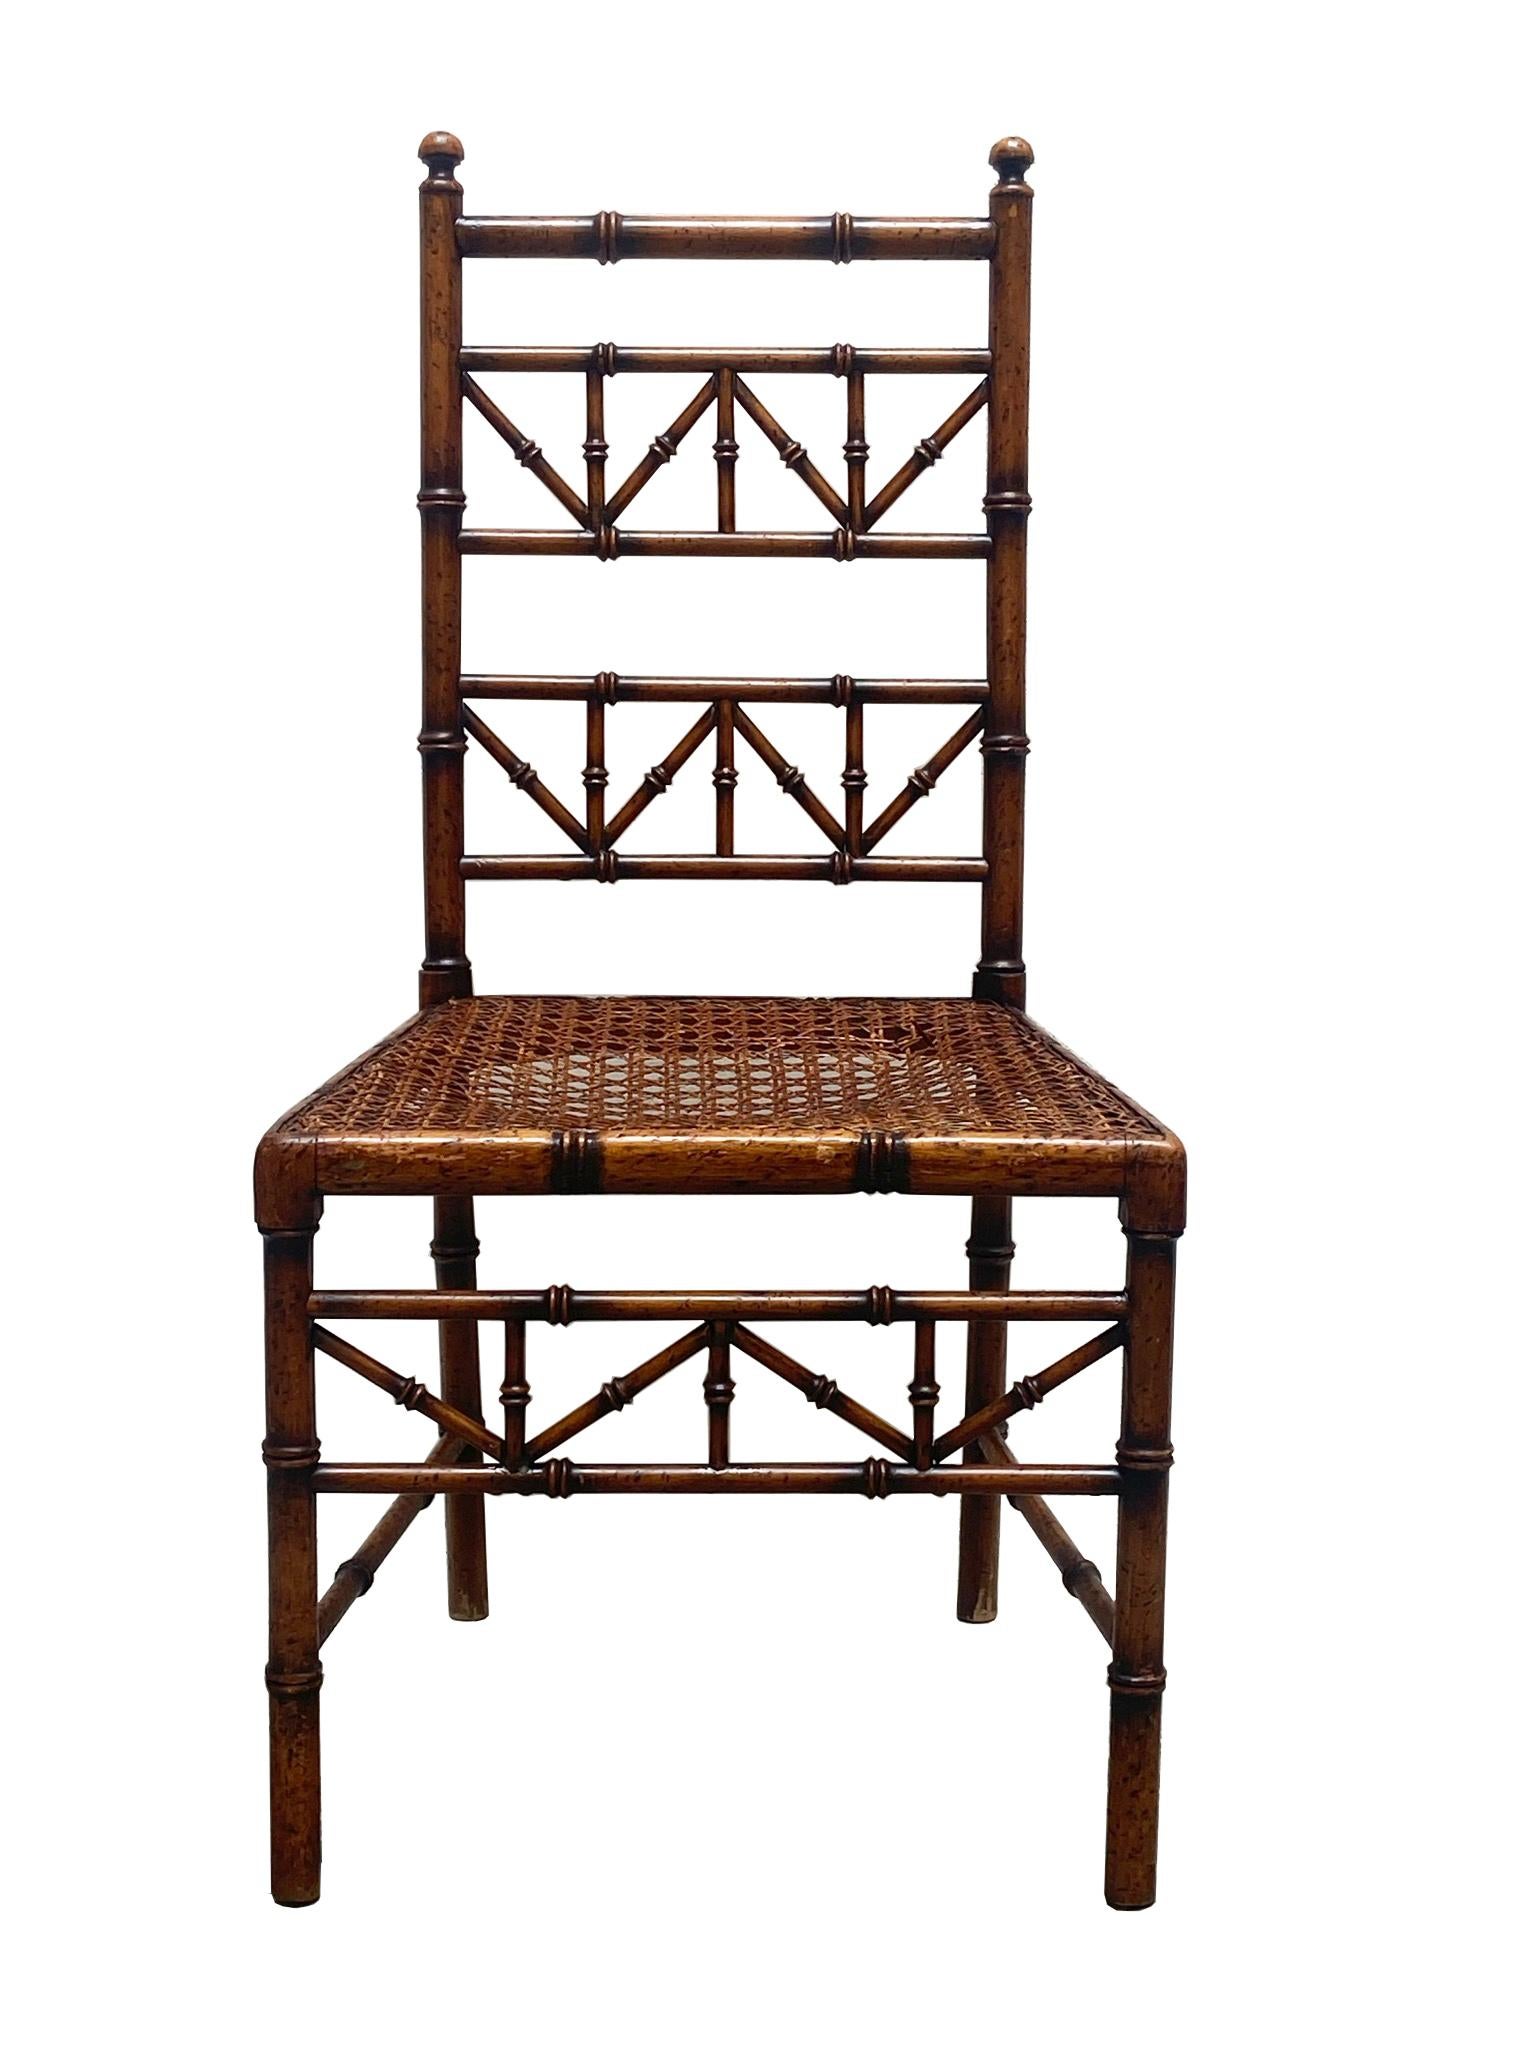 Elegant 1950s chair in inlaid wood, rattan, wicker and Vienna straw resting on four rounded and tapered feet. It is a generously sized model.